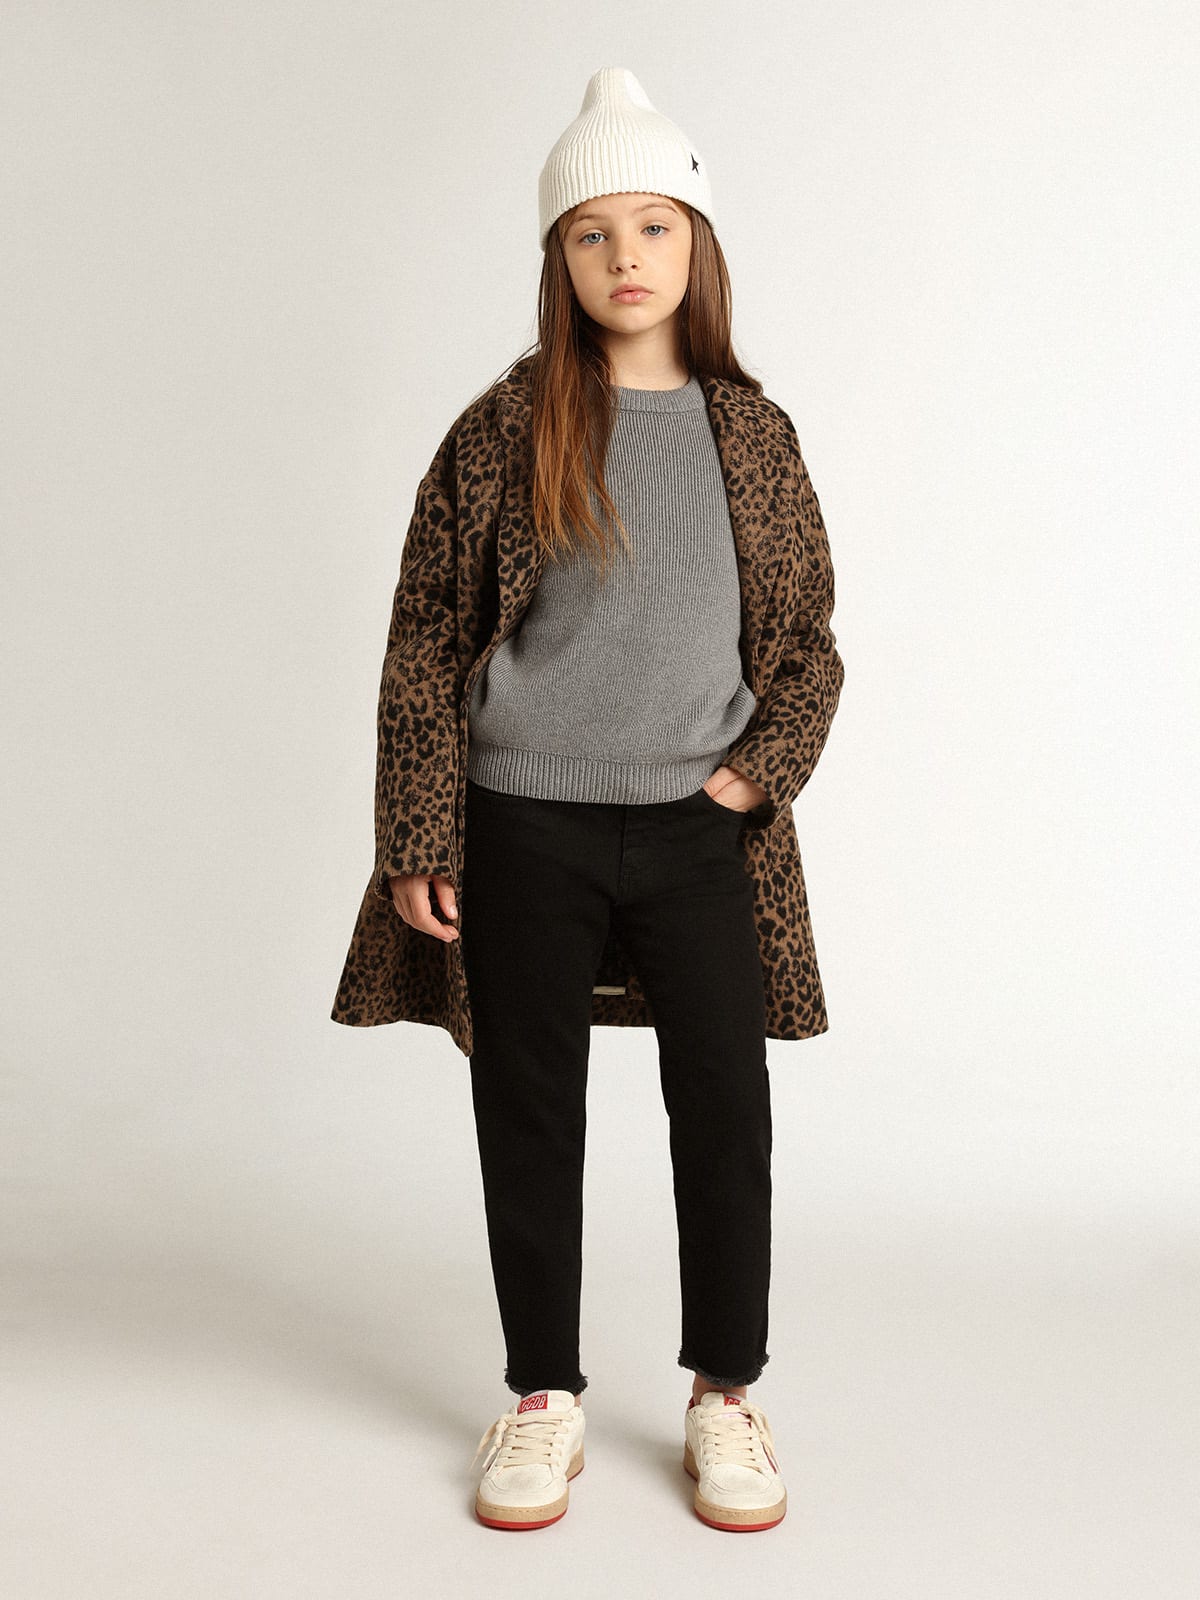 Golden Goose - Girls’ single-breasted blazer in wool with jacquard animal print in 